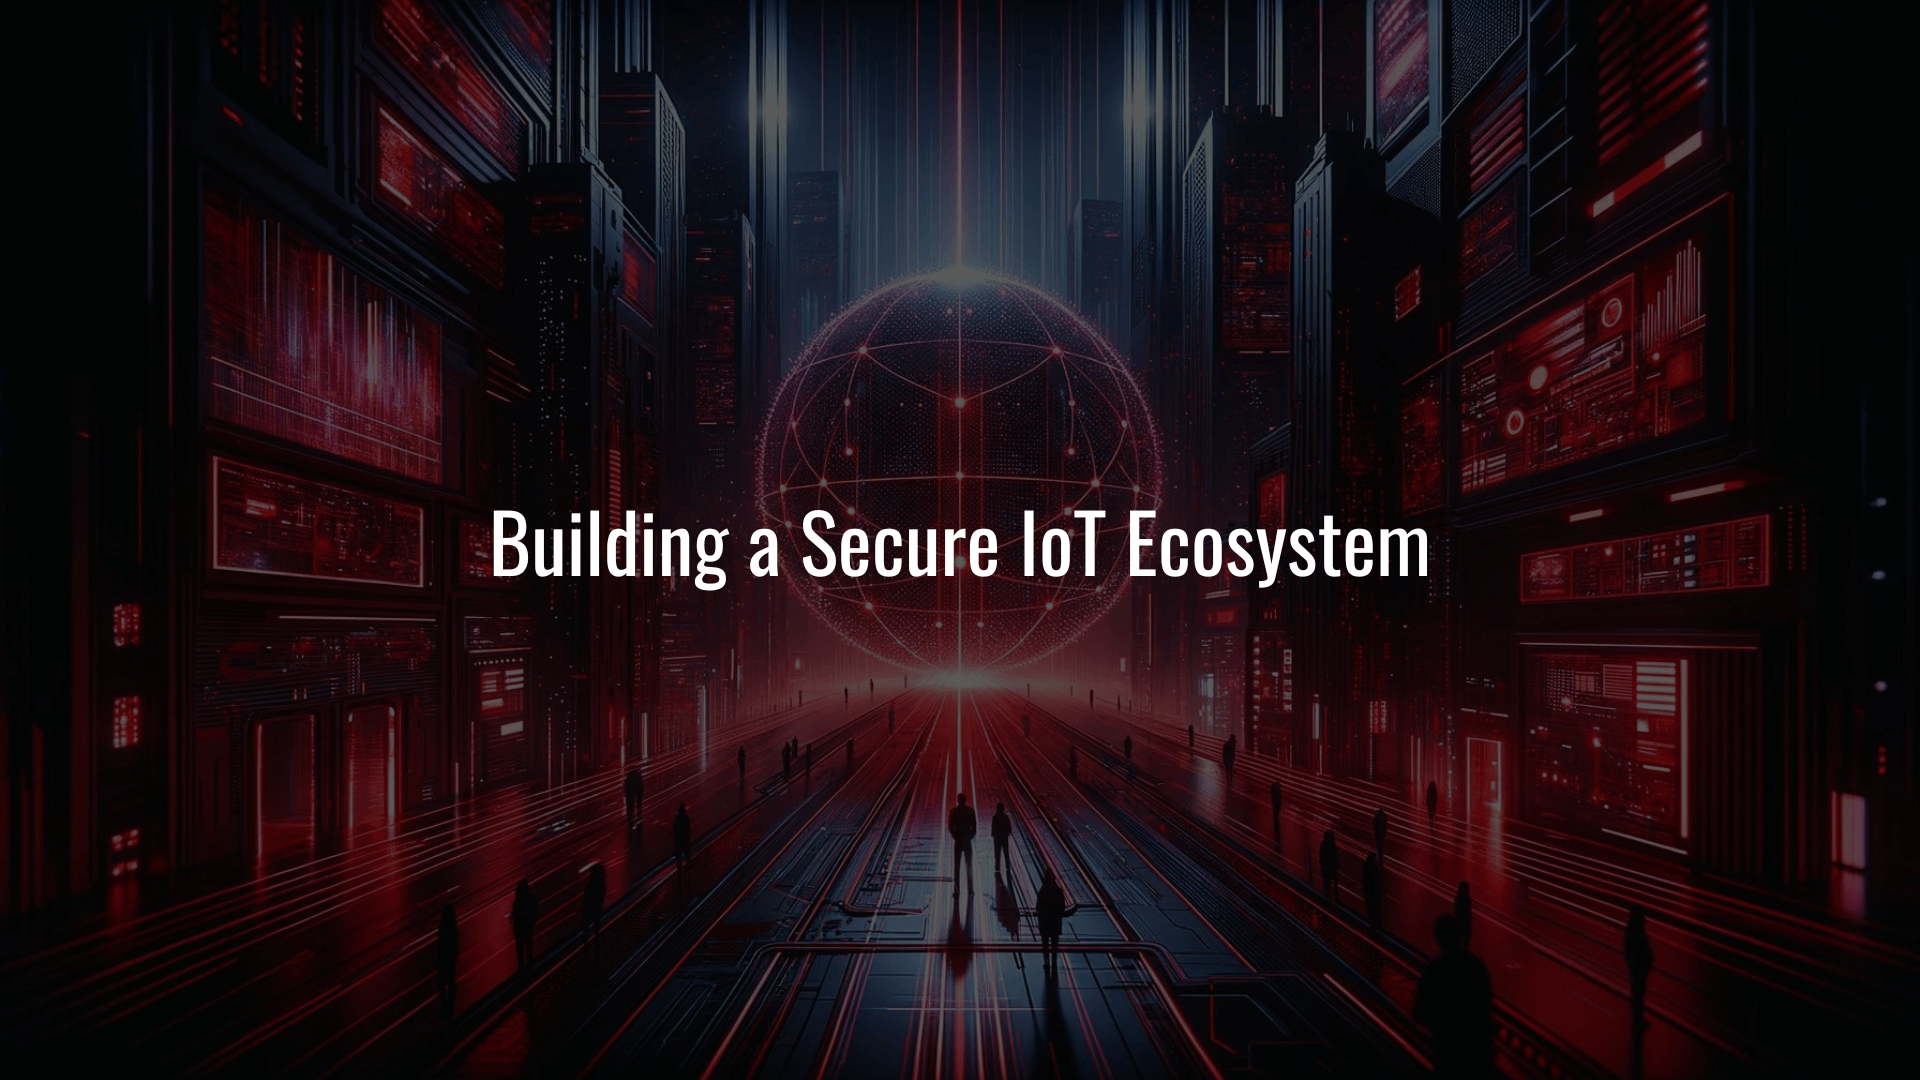 Building a Secure IoT Ecosystem: How Salience Empowered a Telecom Company